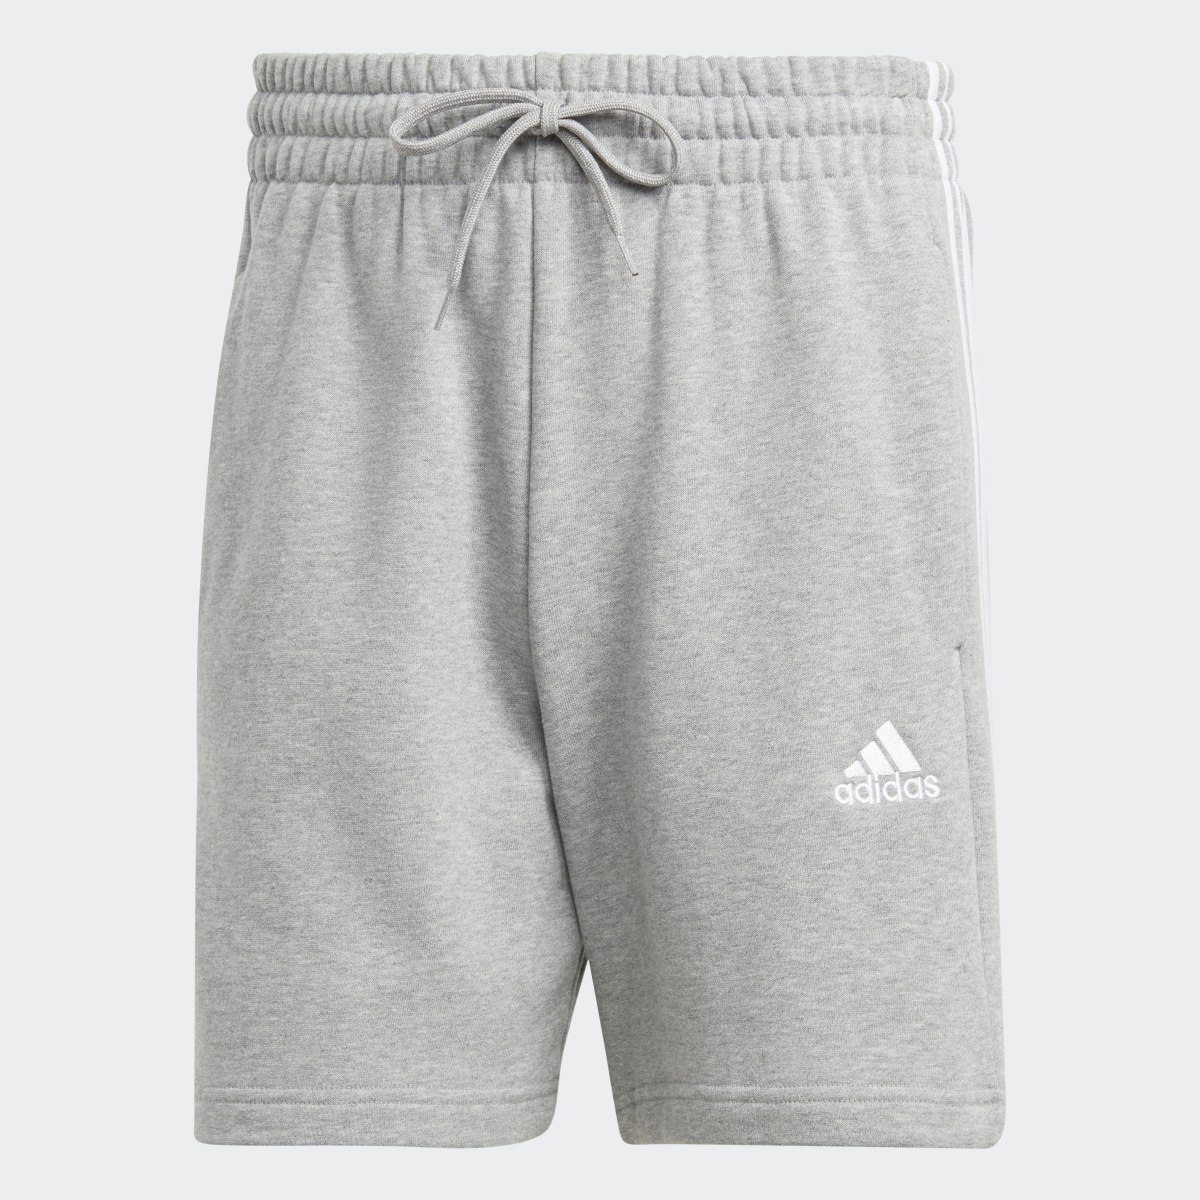 Adidas Essentials French Terry 3-Stripes Shorts. 4